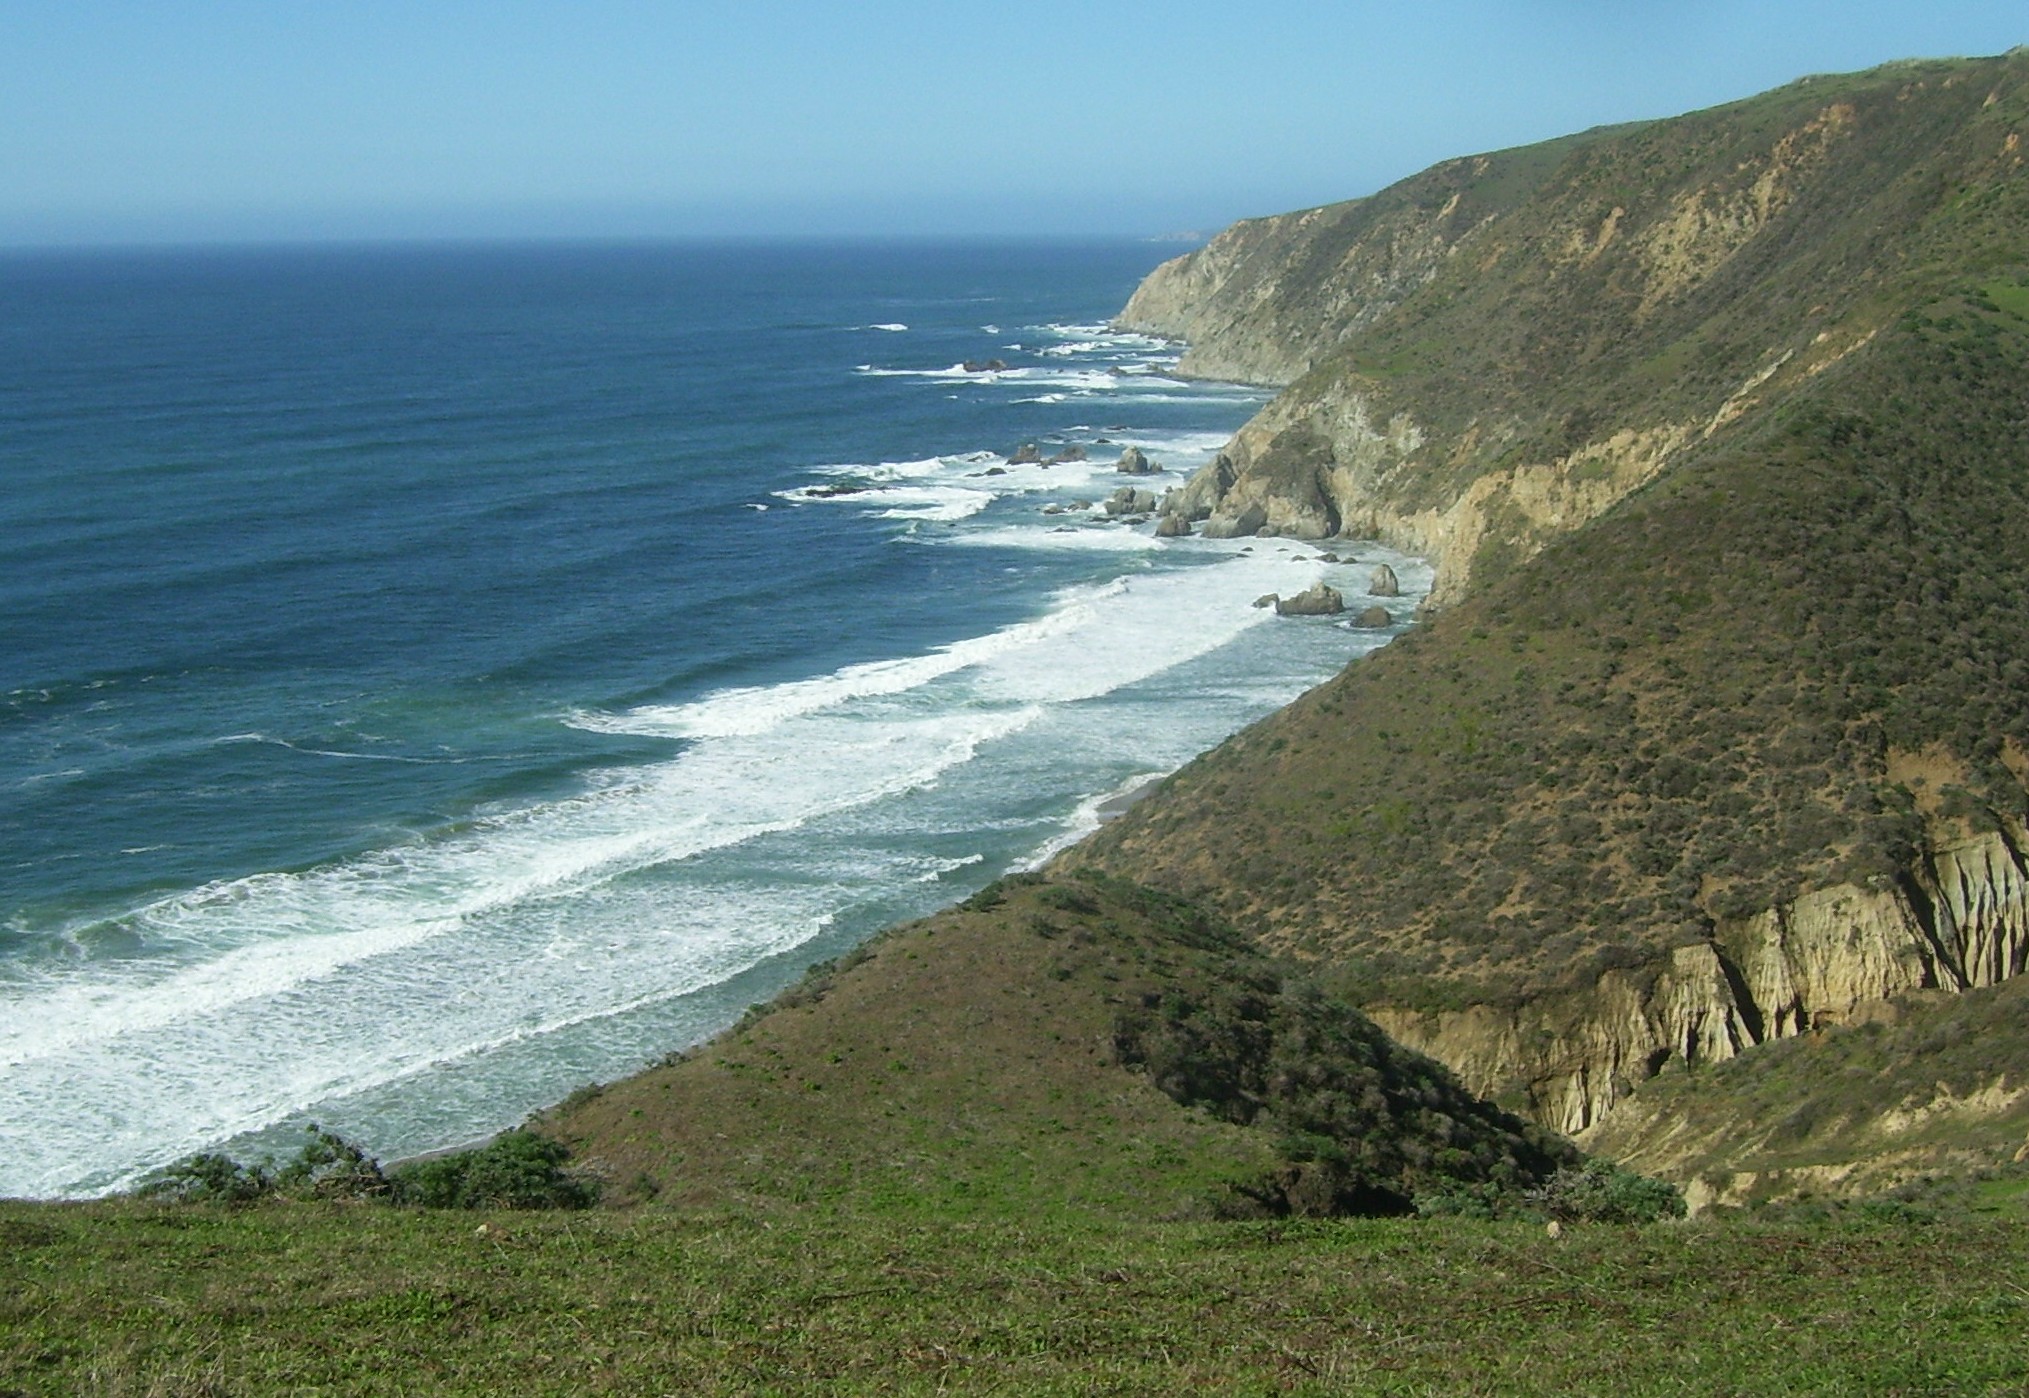 the Pacific Ocean from North of Pt. Reyes